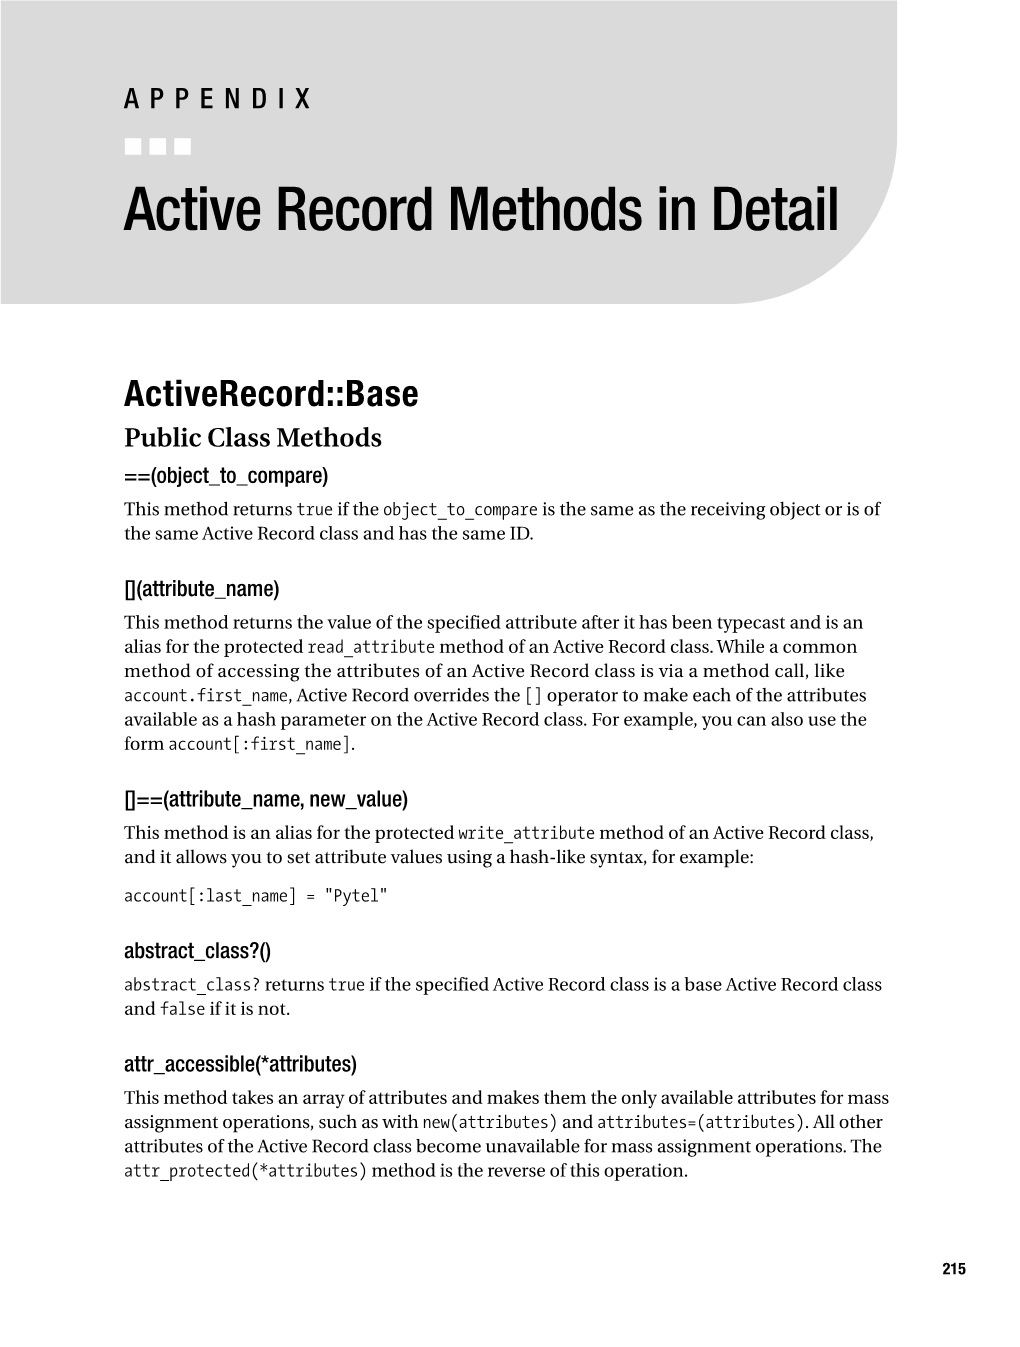 Active Record Methods in Detail